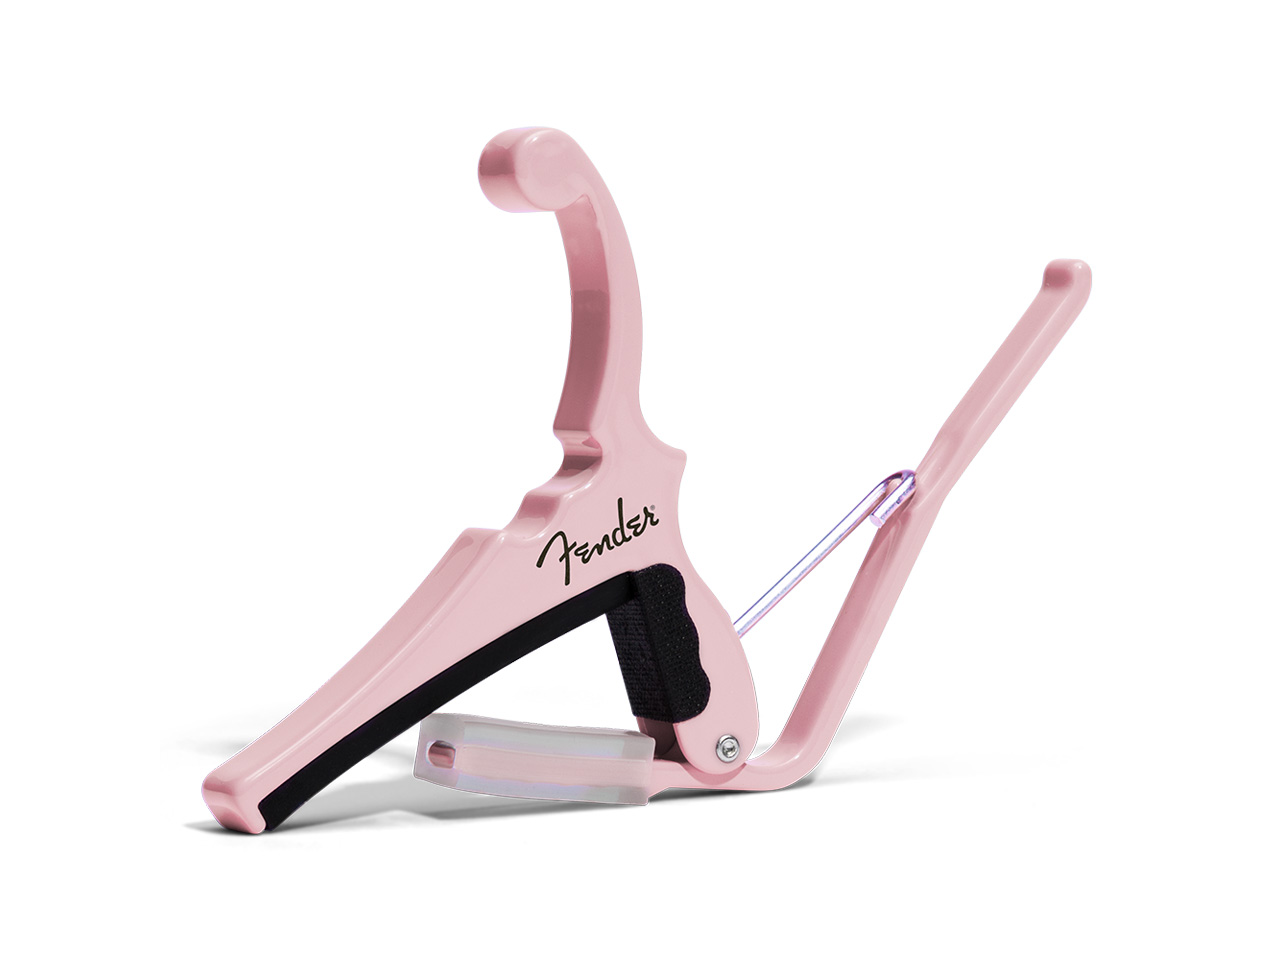 KYSER(カイザー) Fender® x Kyser® Quick-Change® Electric Guitar Capo 6 STRING SHELL PINK / KGEFSPA (カポタスト)